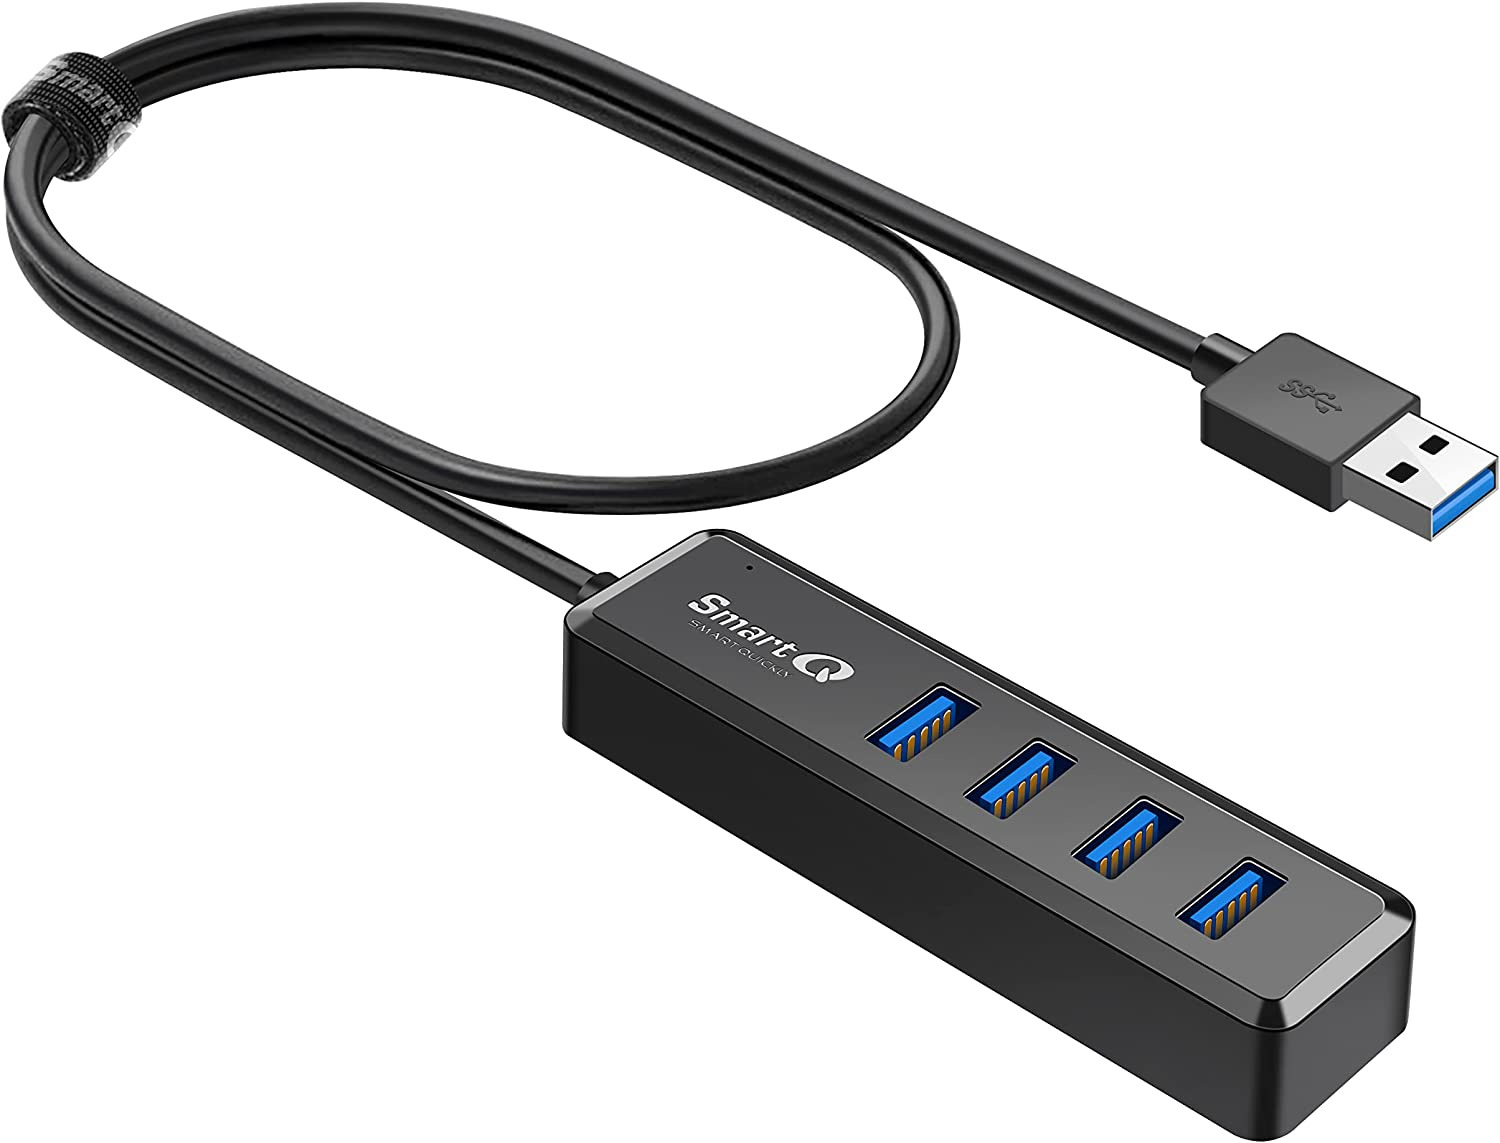 Smartq H302S USB 3.0 Hub for Laptop with 2Ft Long Cable, Multi USB Port Expander